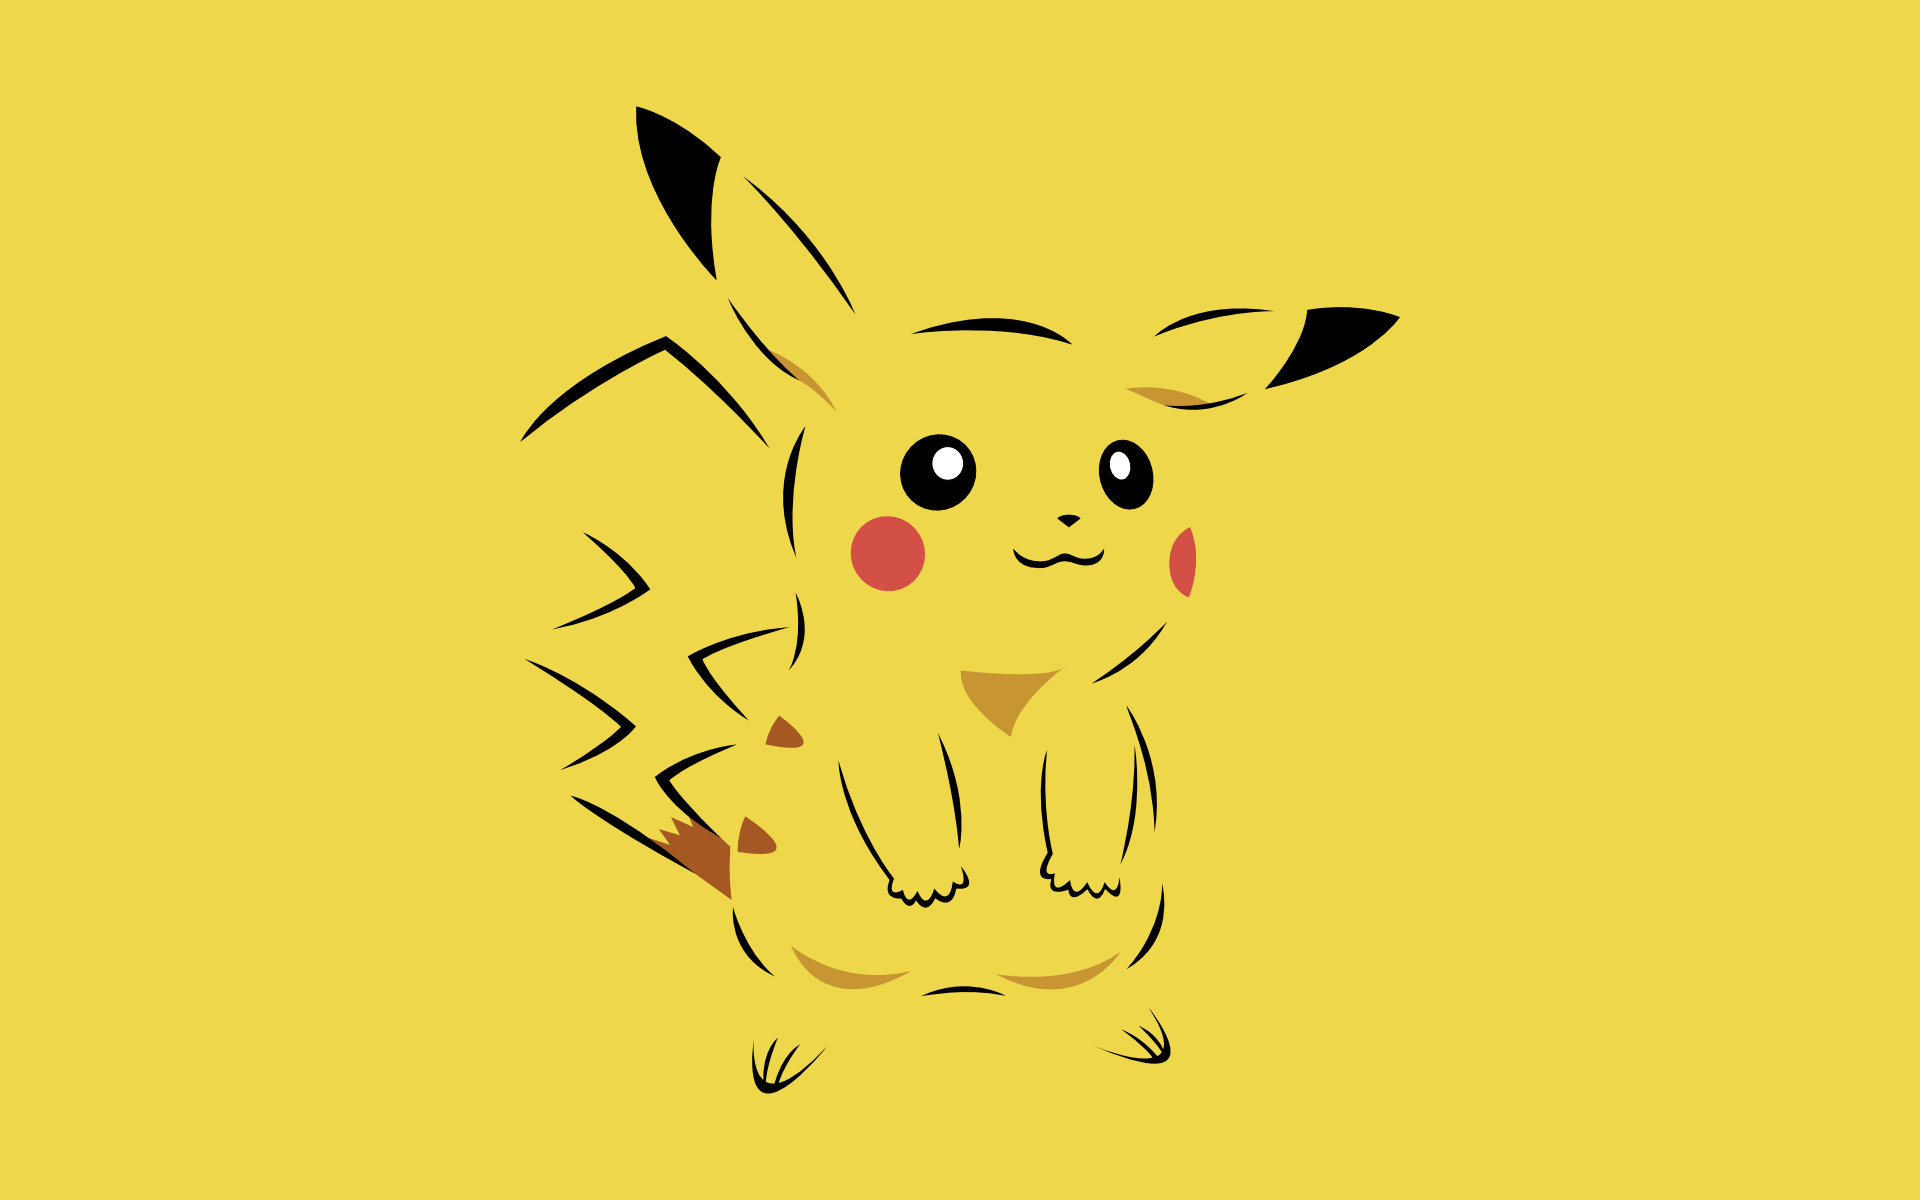 Pokemon Minimalist Wallpapers  Cute Pikachu Wallpapers for iPhone